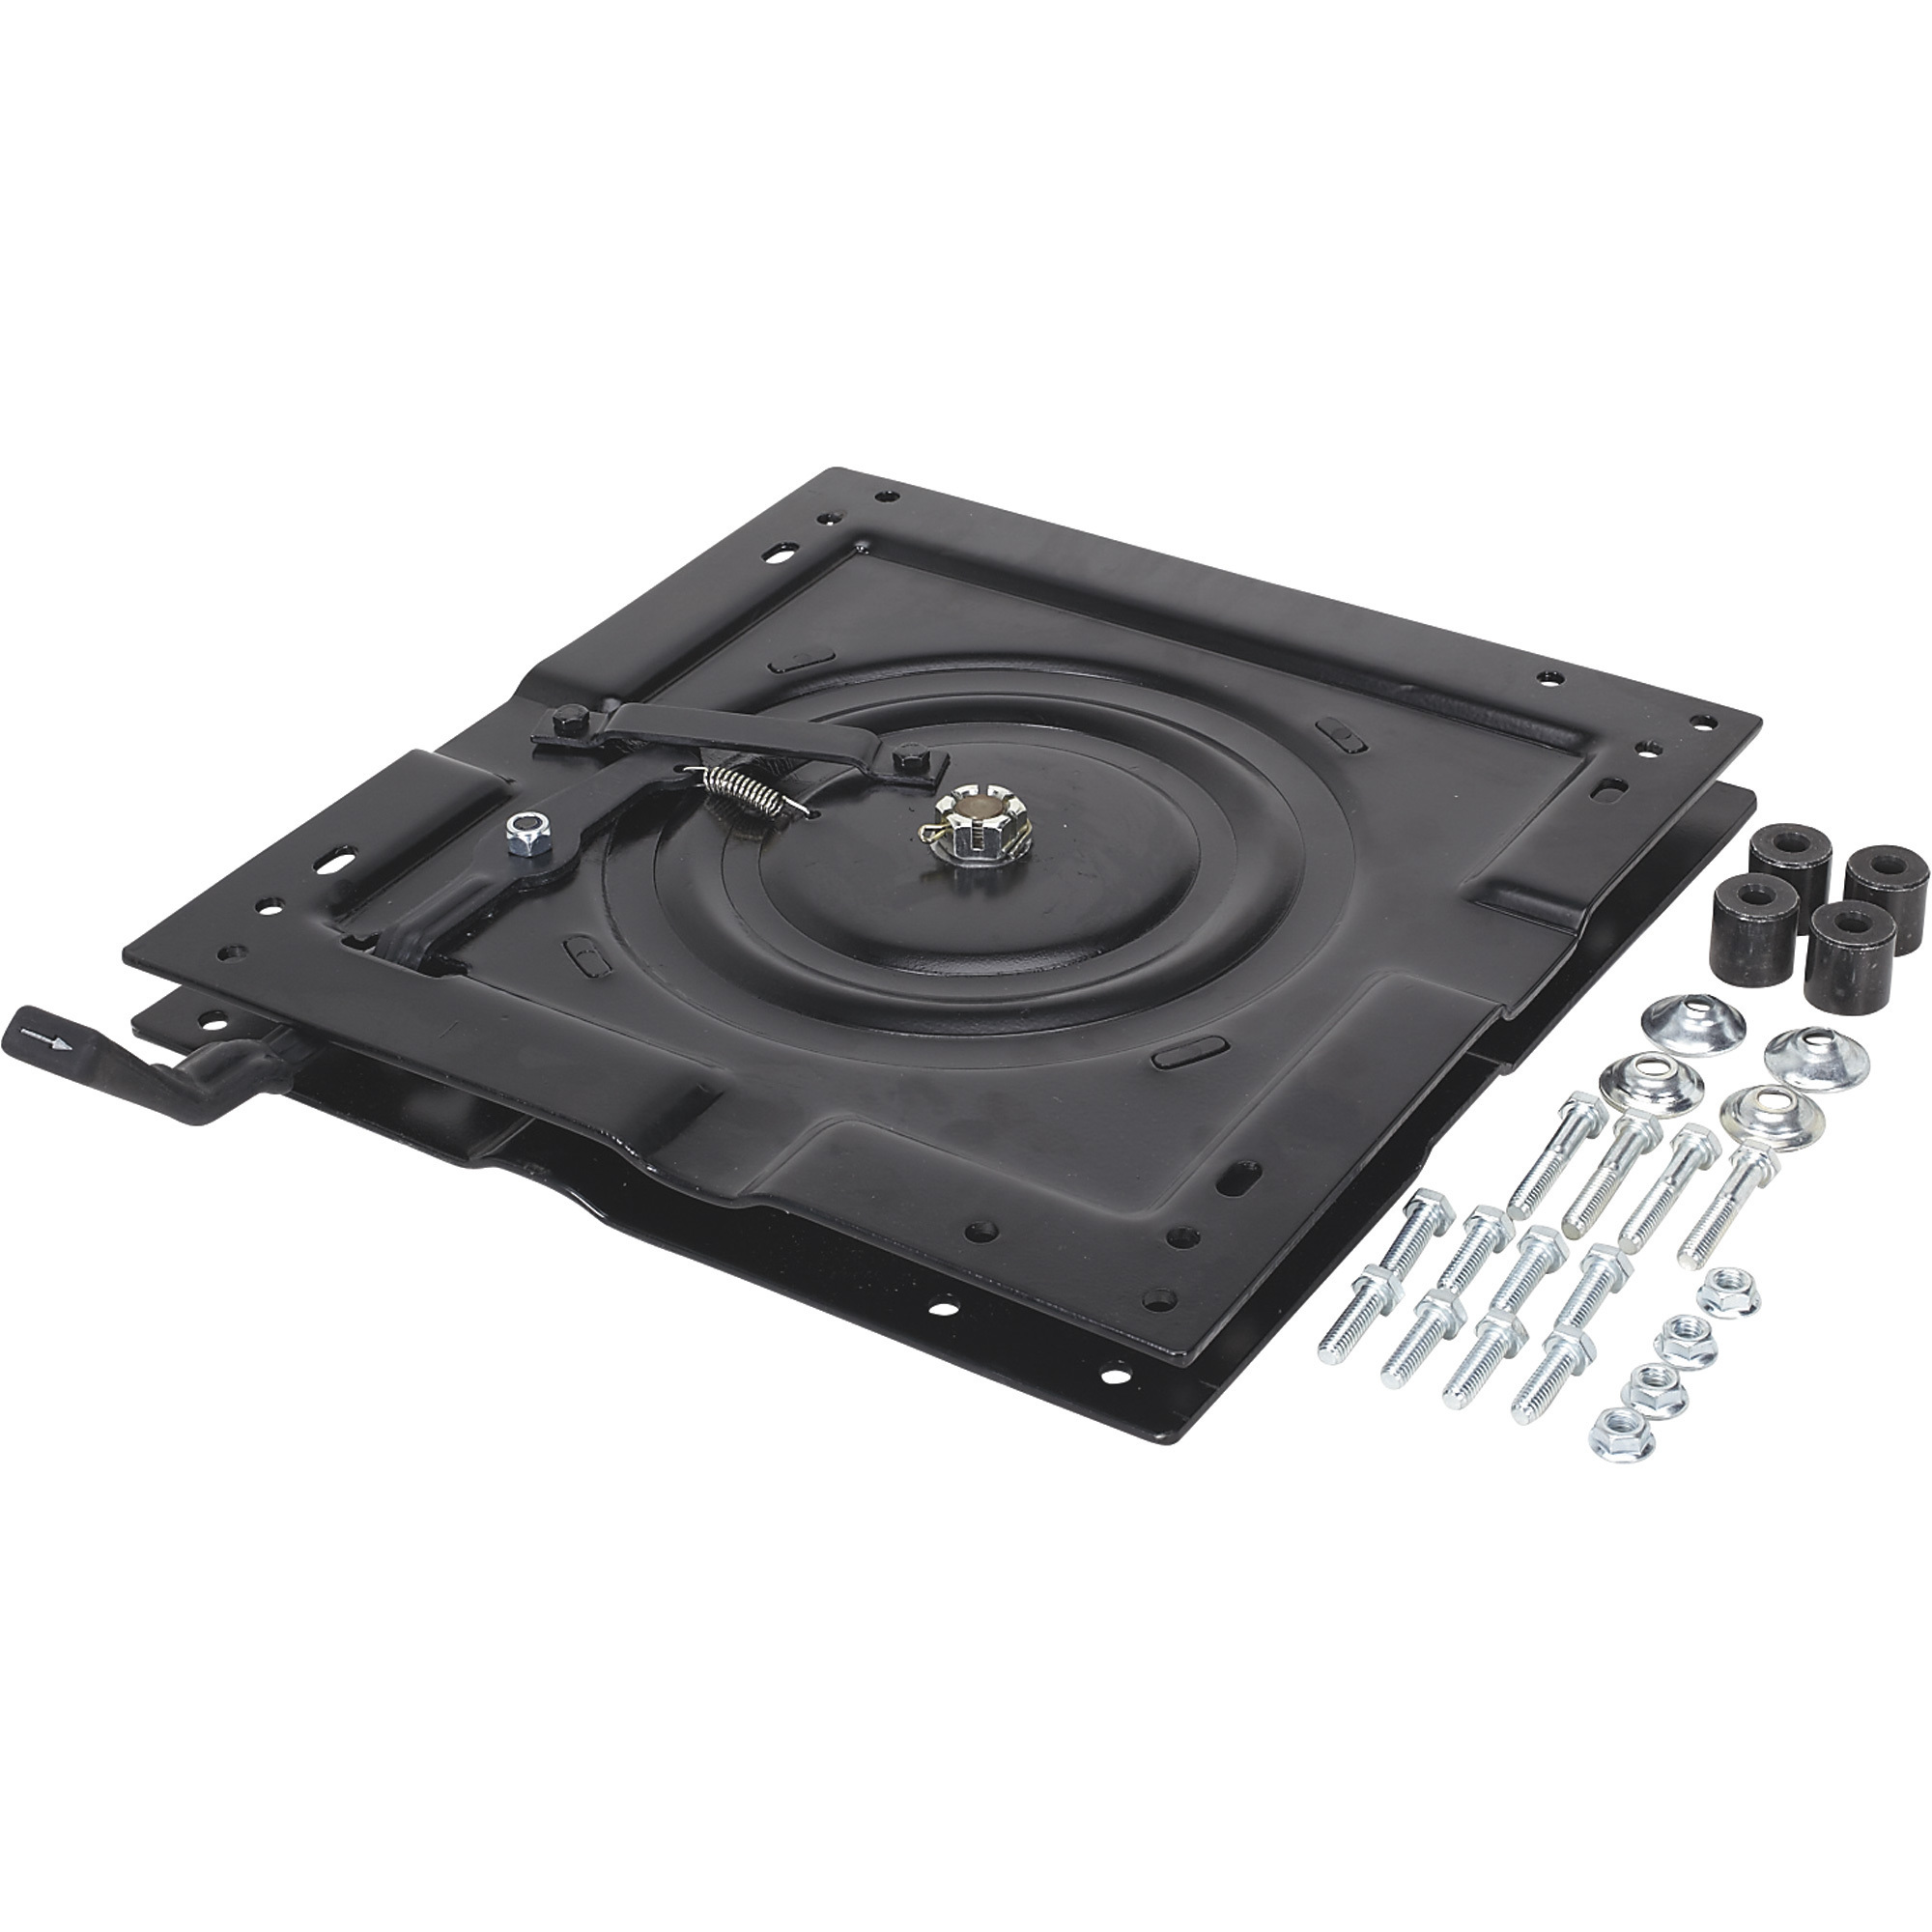 Swivel Seat Mounting Plate, Universal Swivel Seat Base For High Load  Commercial Vehicle